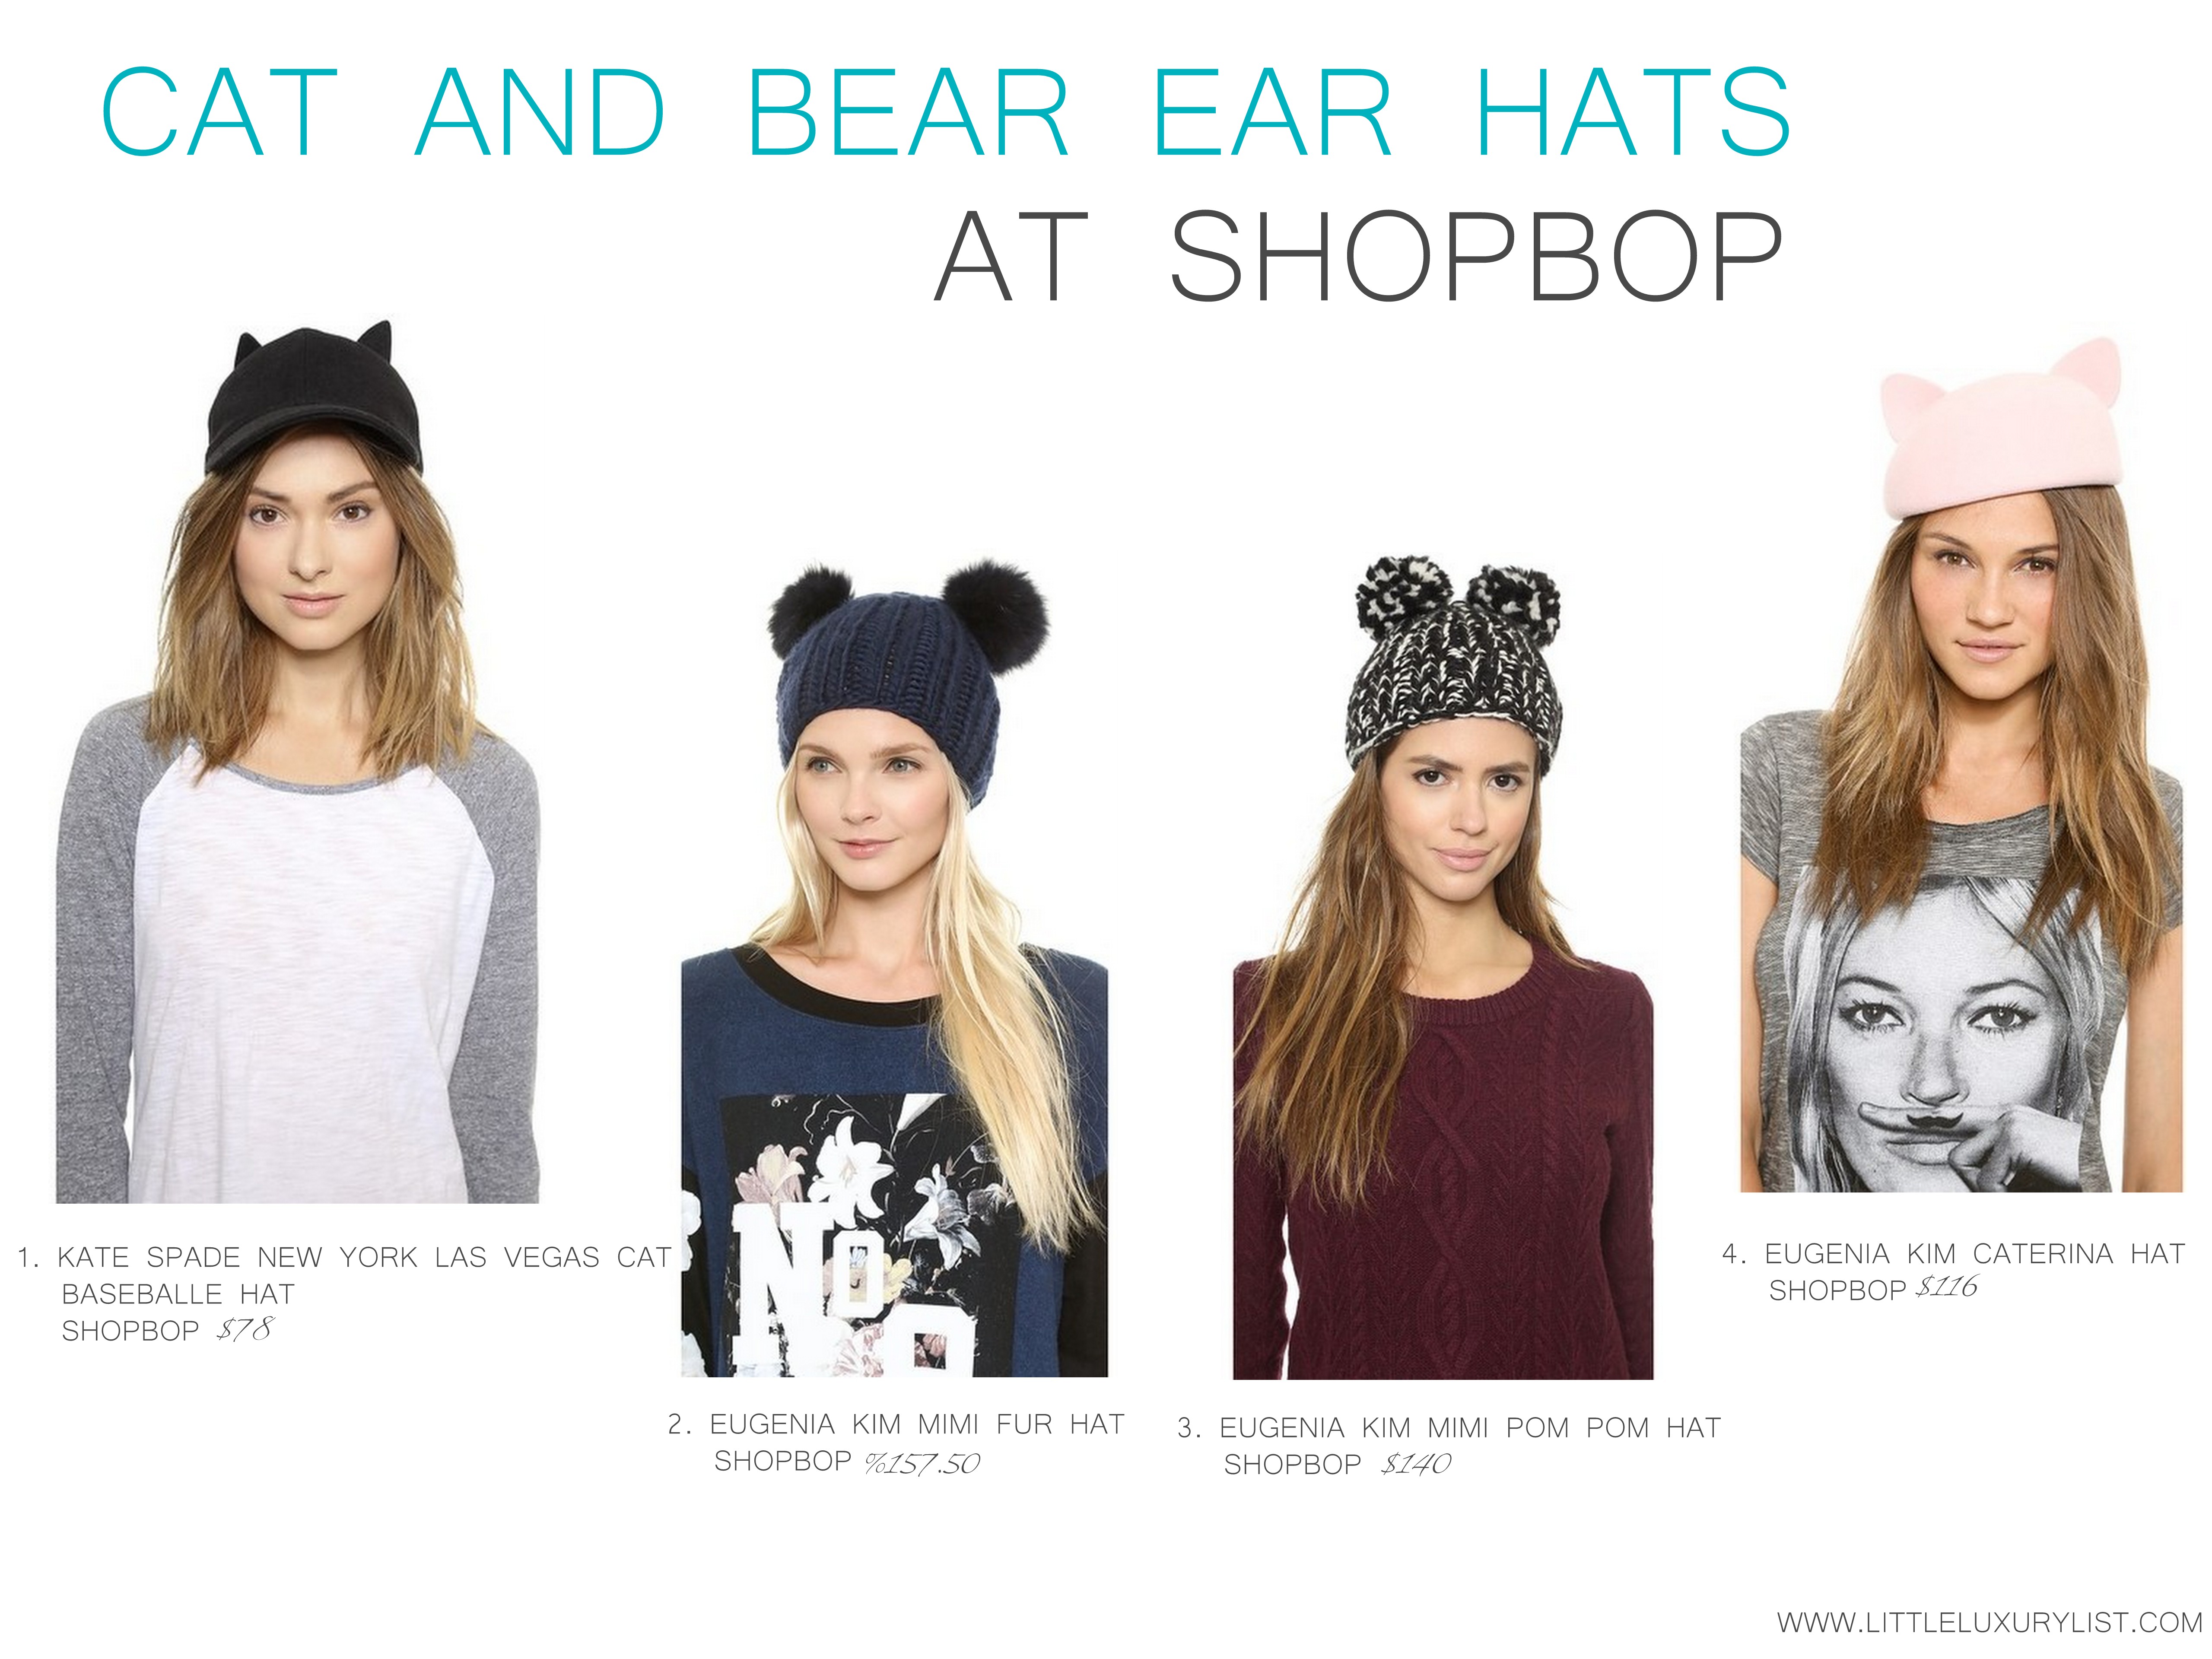 Cat and Bear ear hats at Shopbop by little luxury list